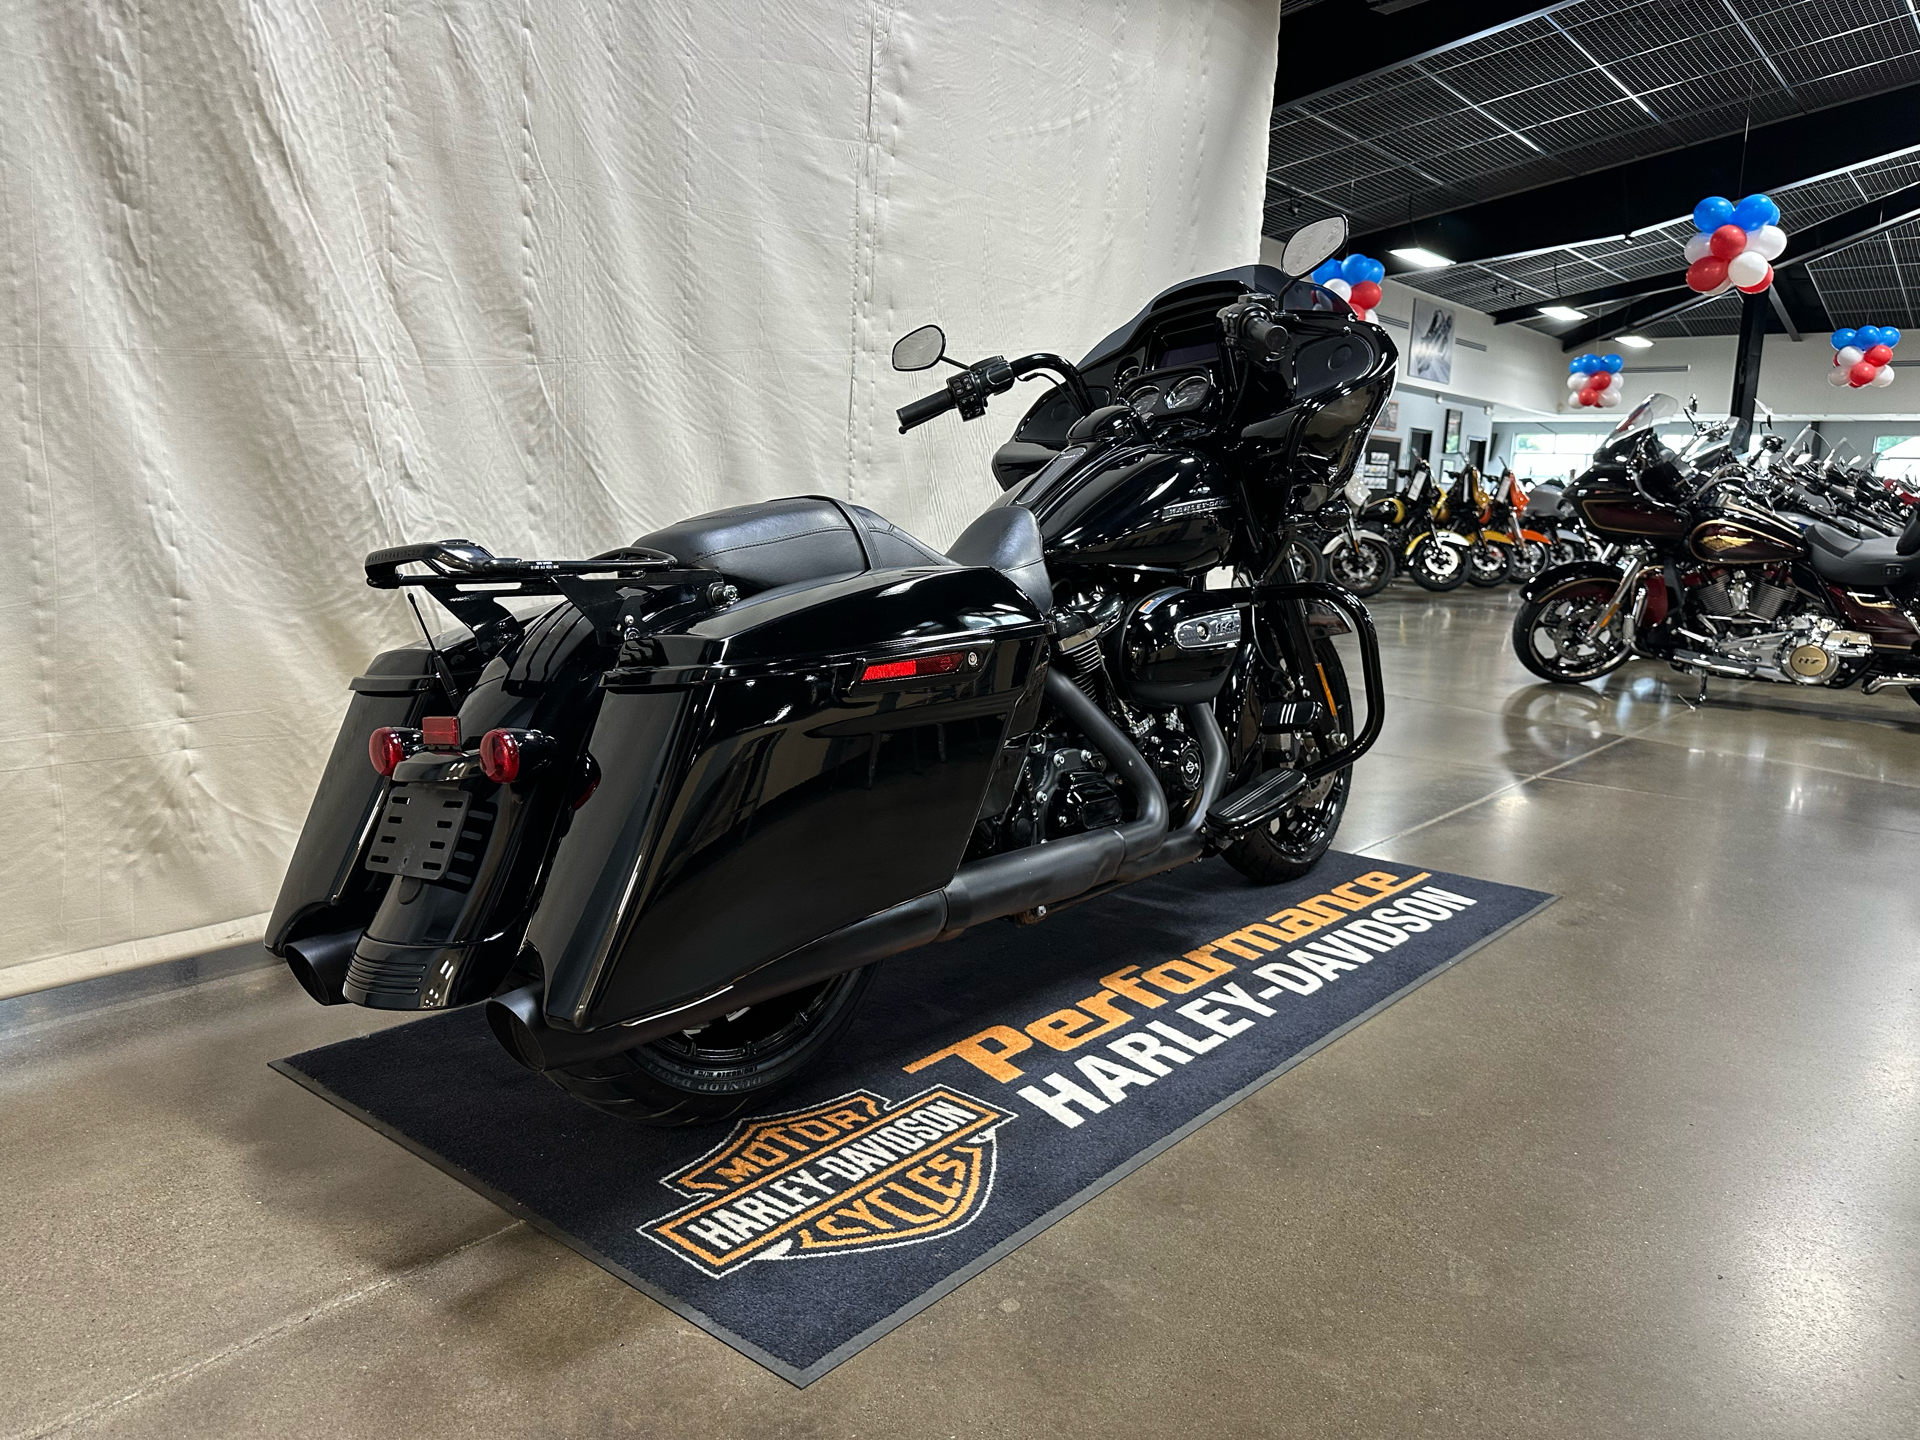 2019 Harley-Davidson Road Glide® Special in Syracuse, New York - Photo 3